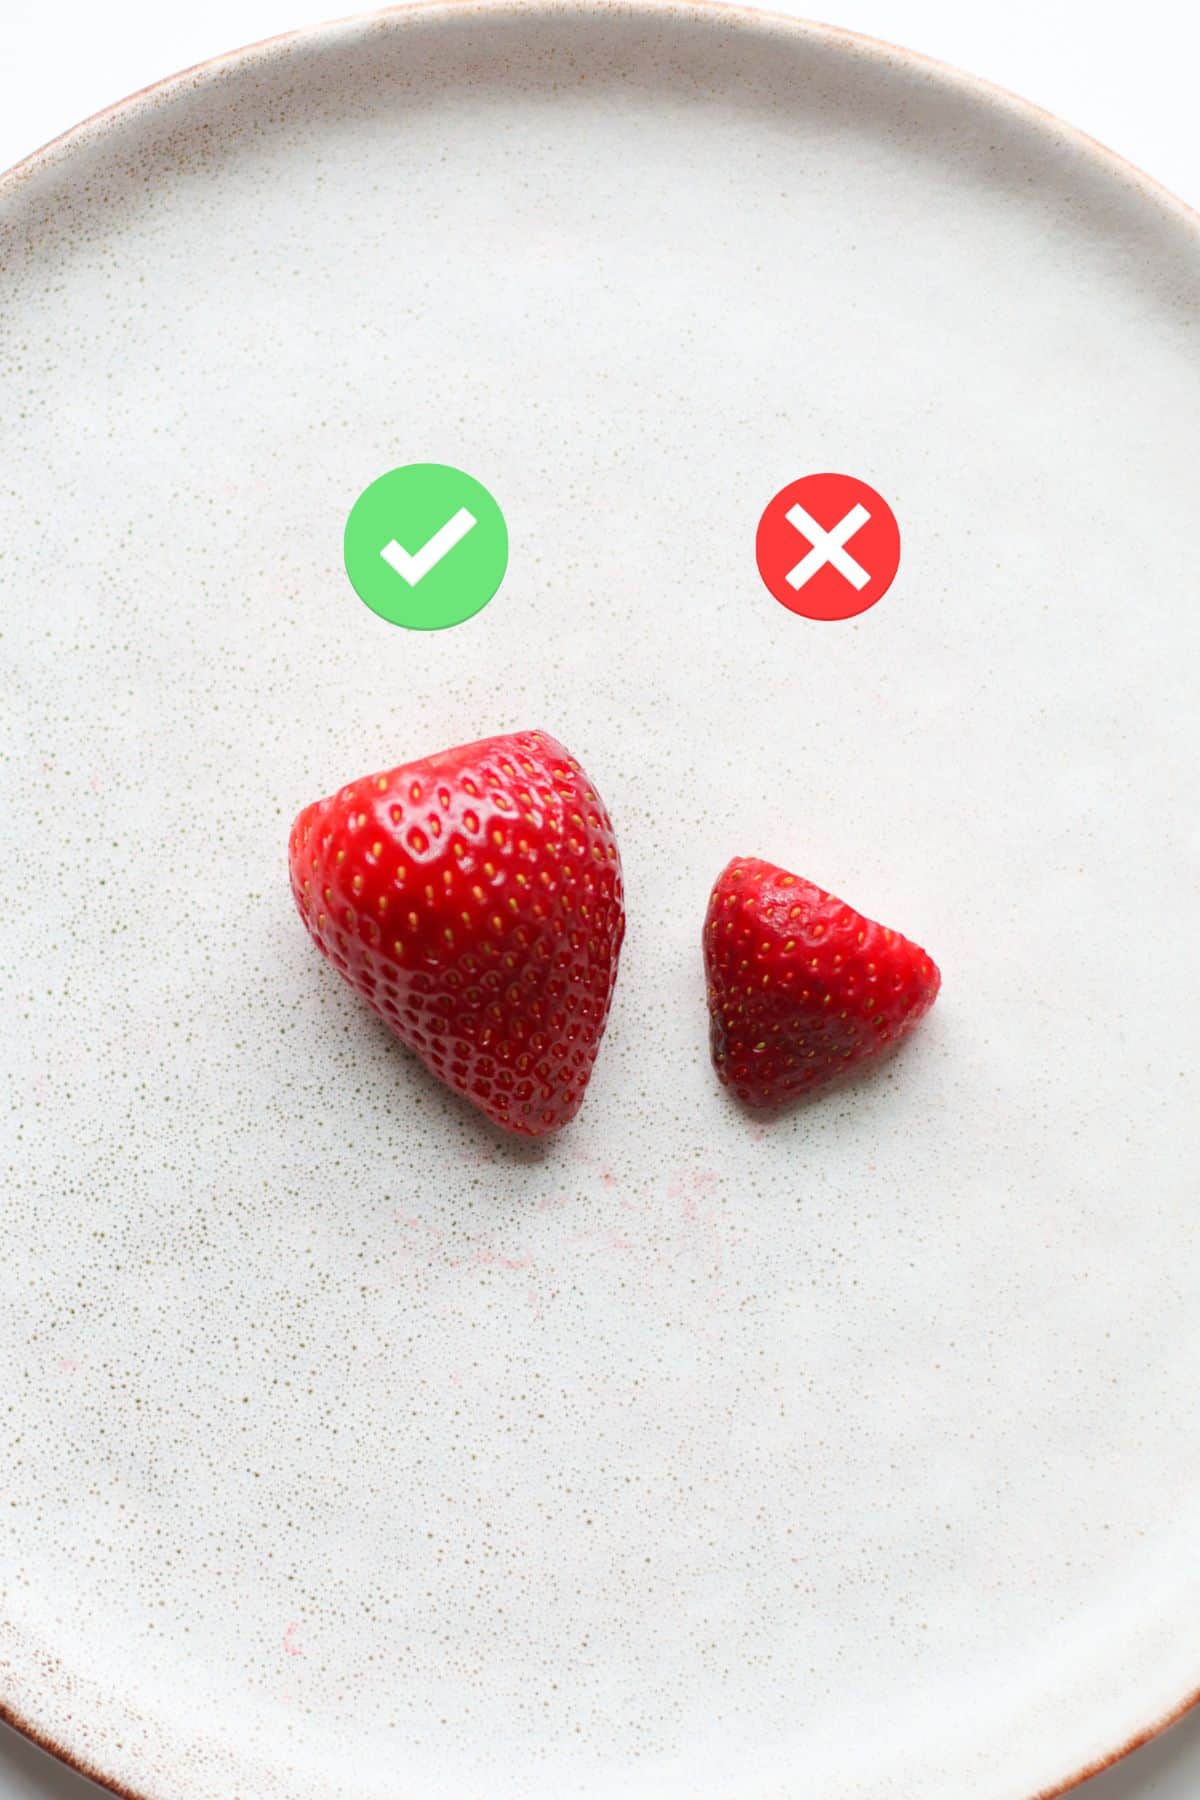 A large strawberry with a checkmark and a small strawberry with an X.